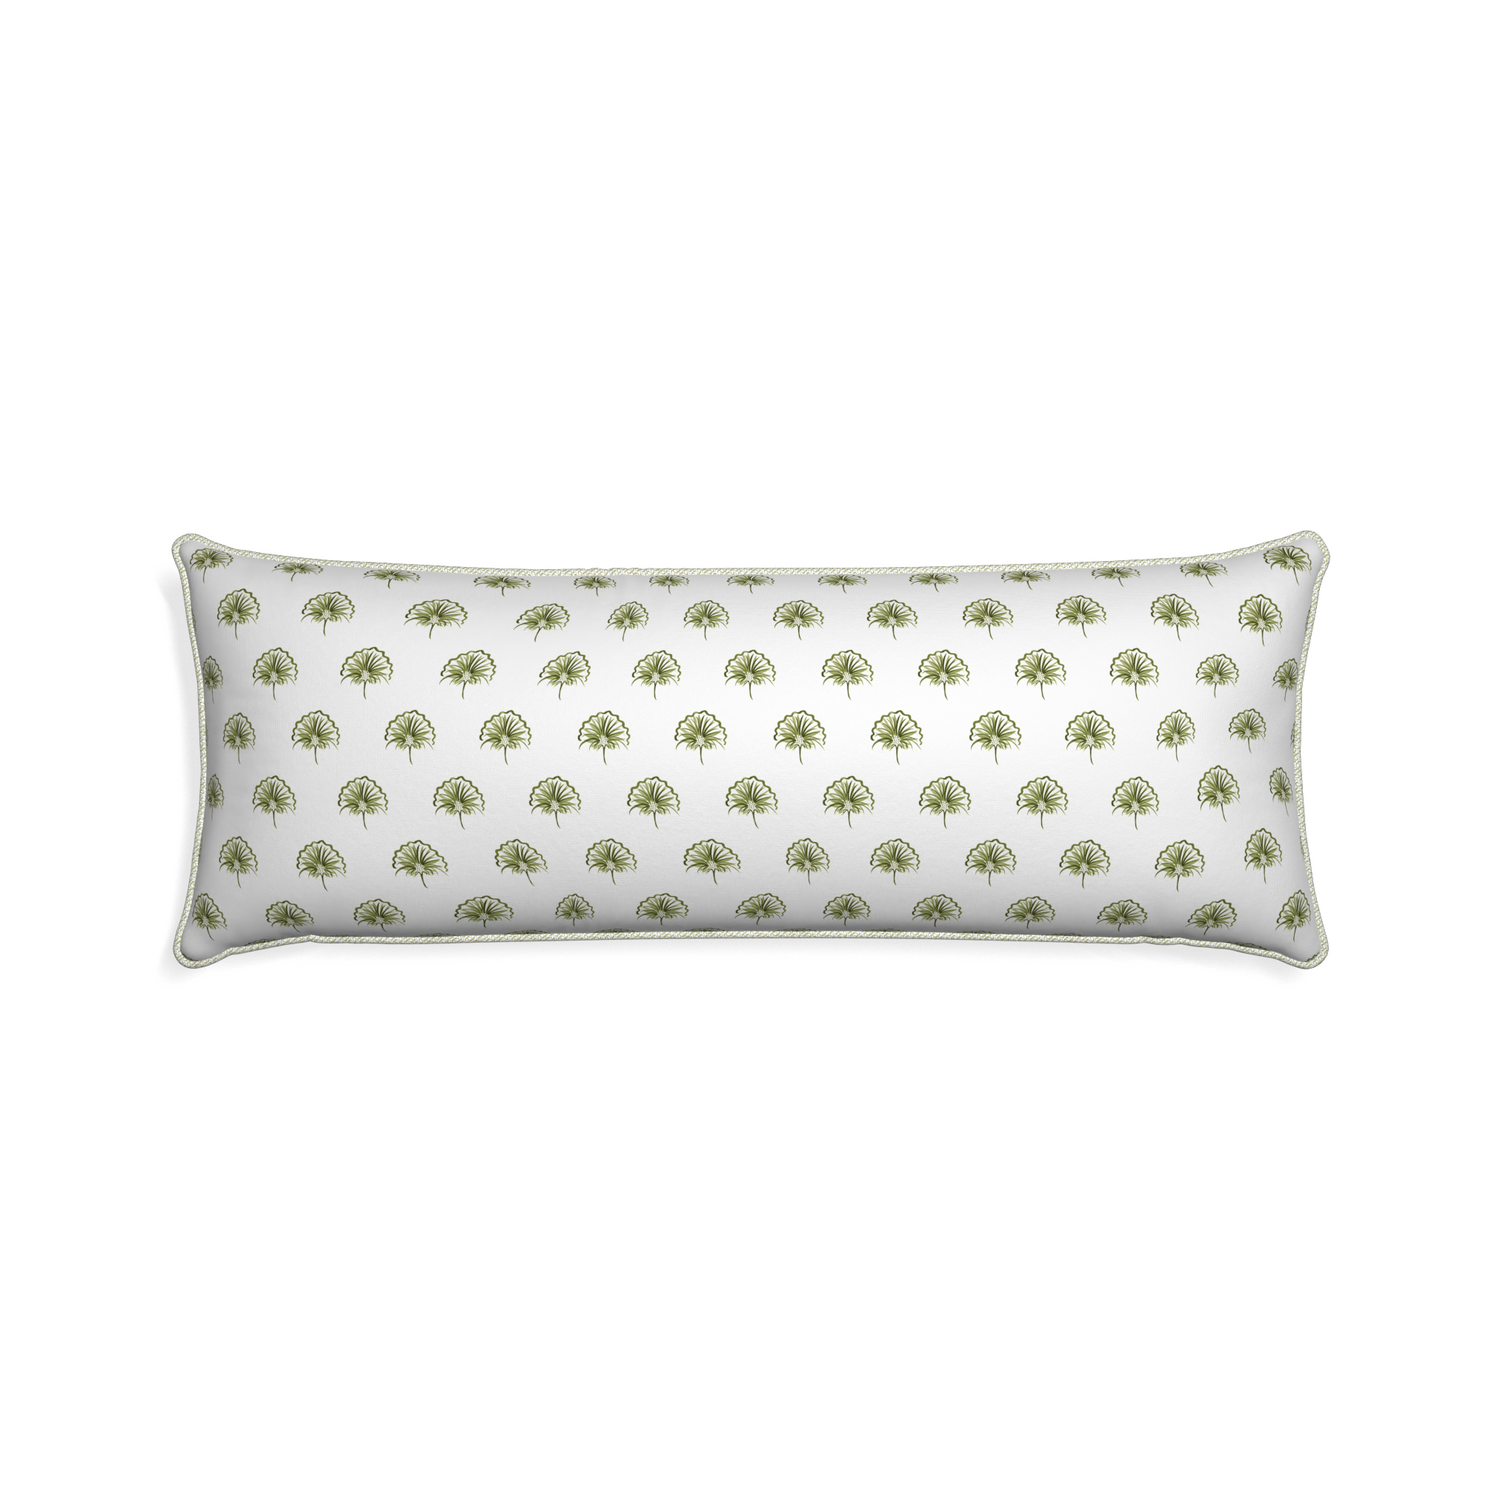 Xl-lumbar penelope moss custom green floralpillow with l piping on white background